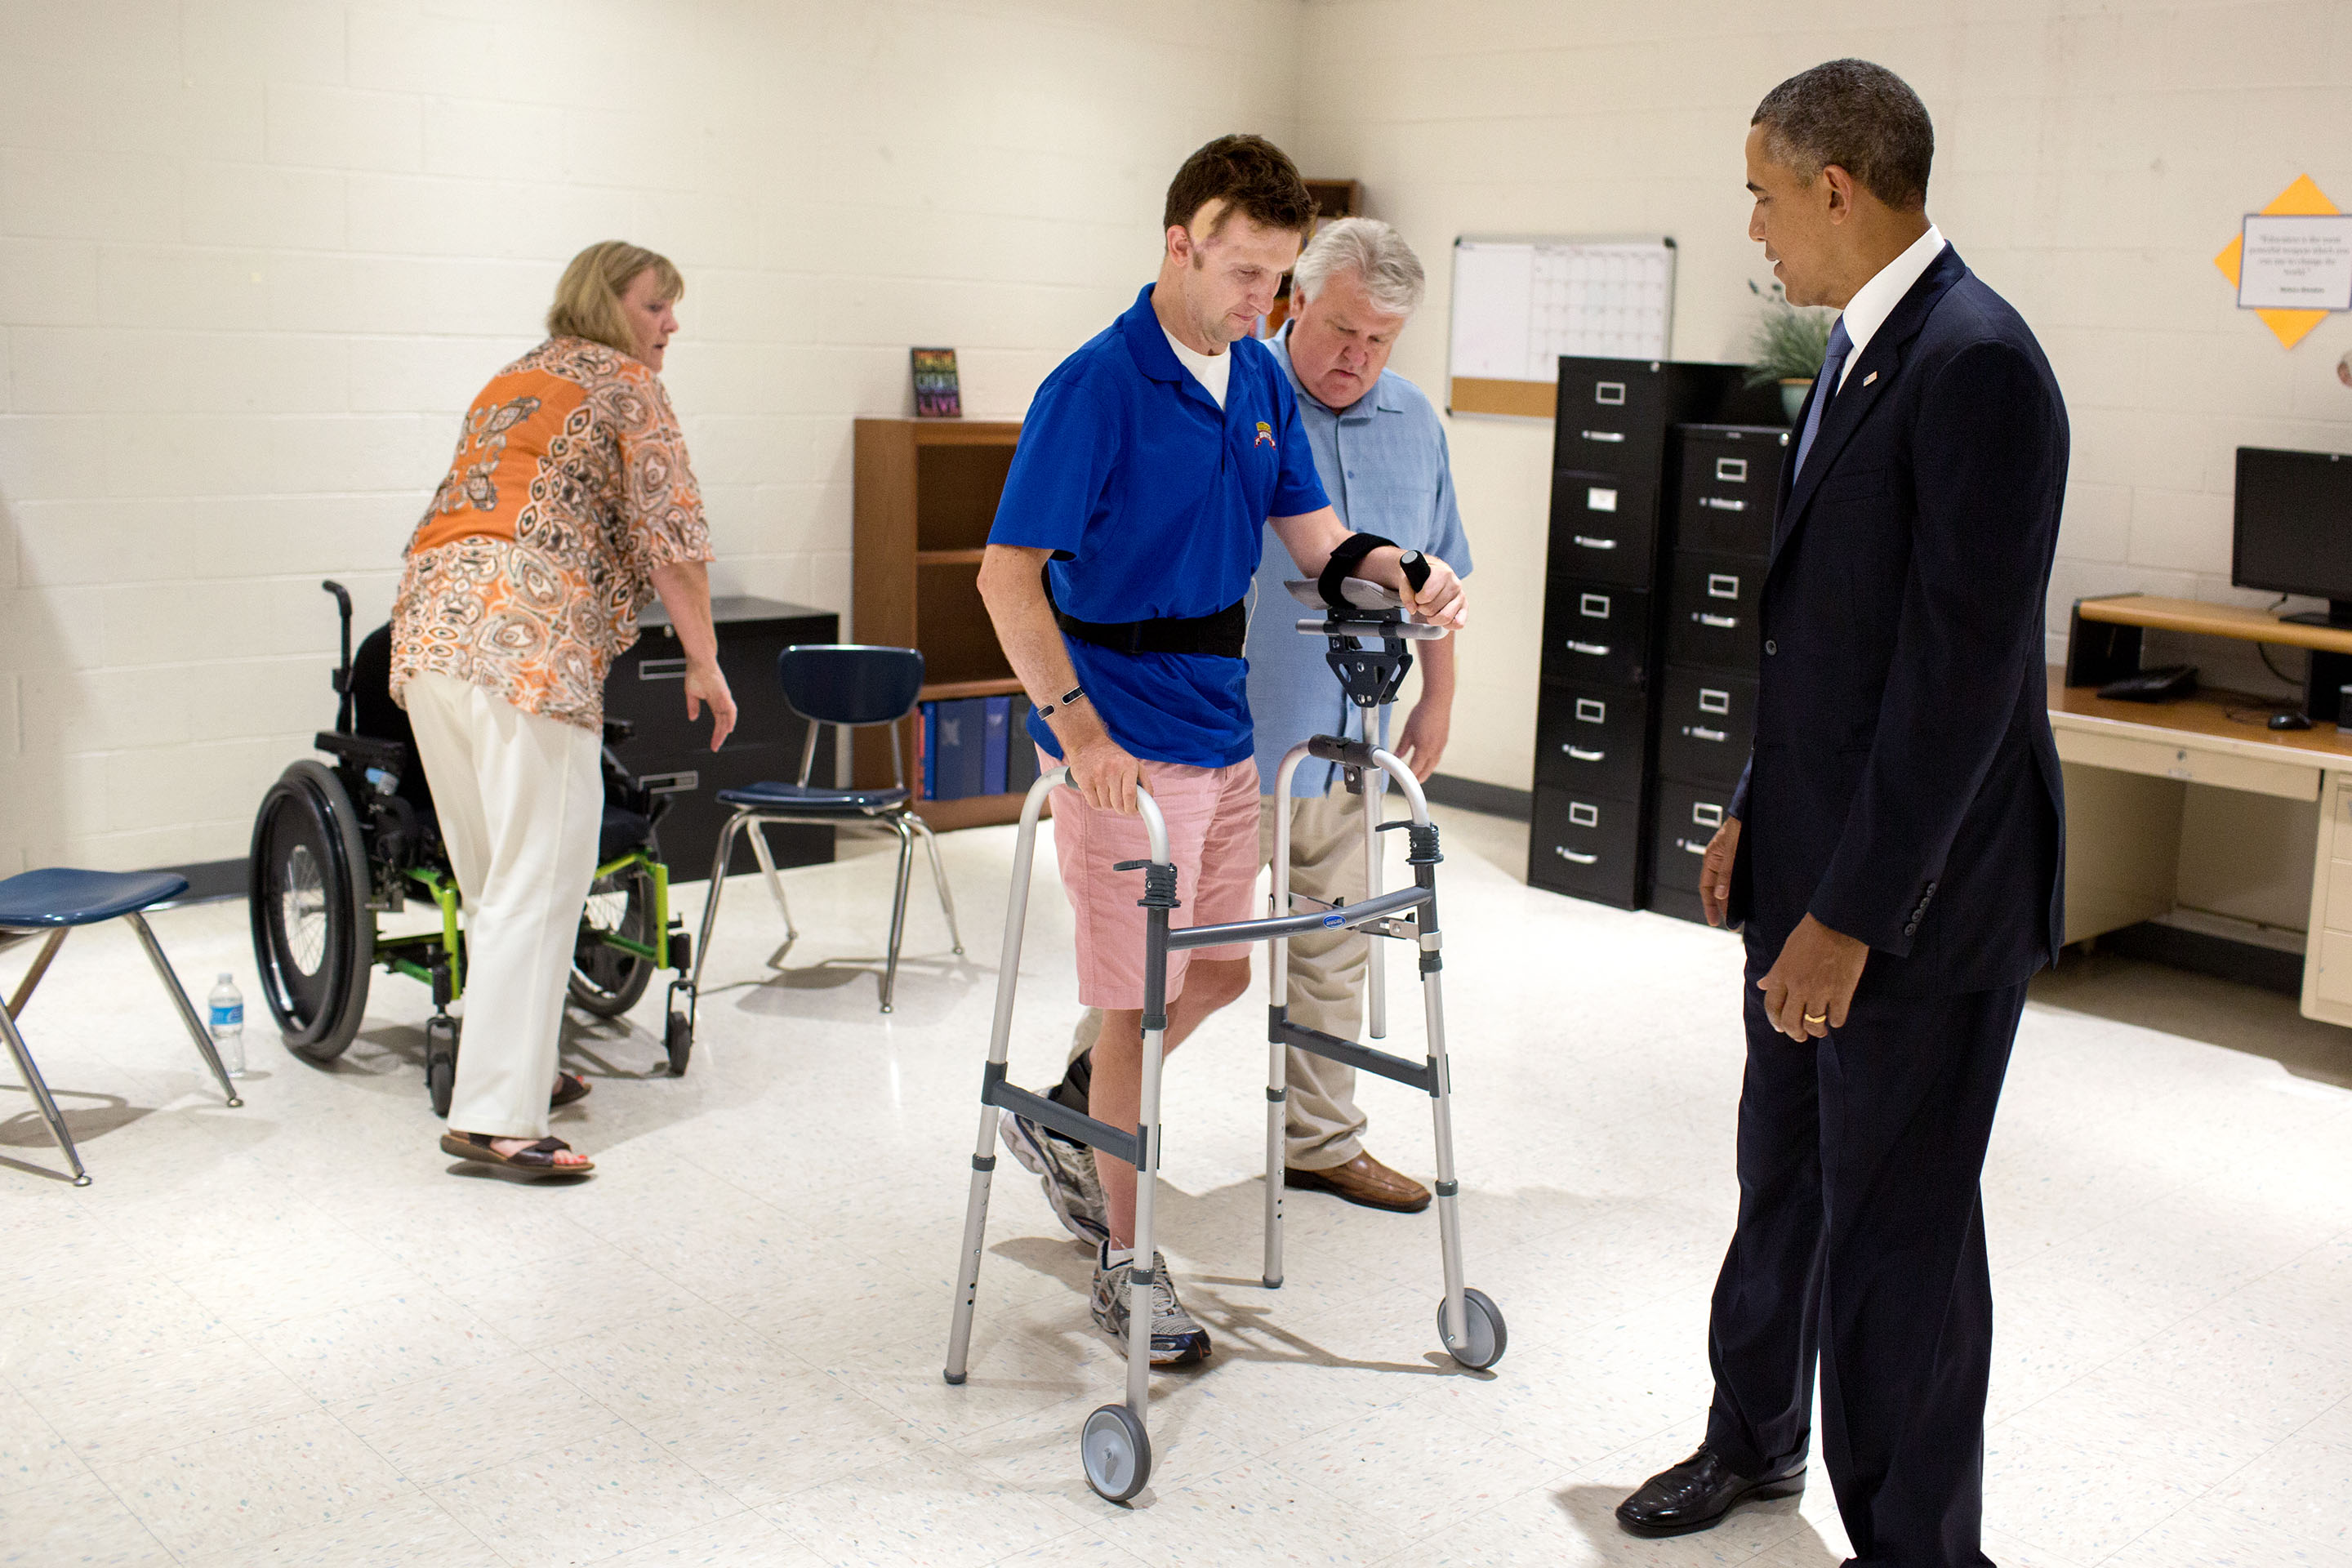 Aug. 6, 2013: Cory walks across a classroom as the President watches in Arizona. (Official White House Photo by Pete Souza)